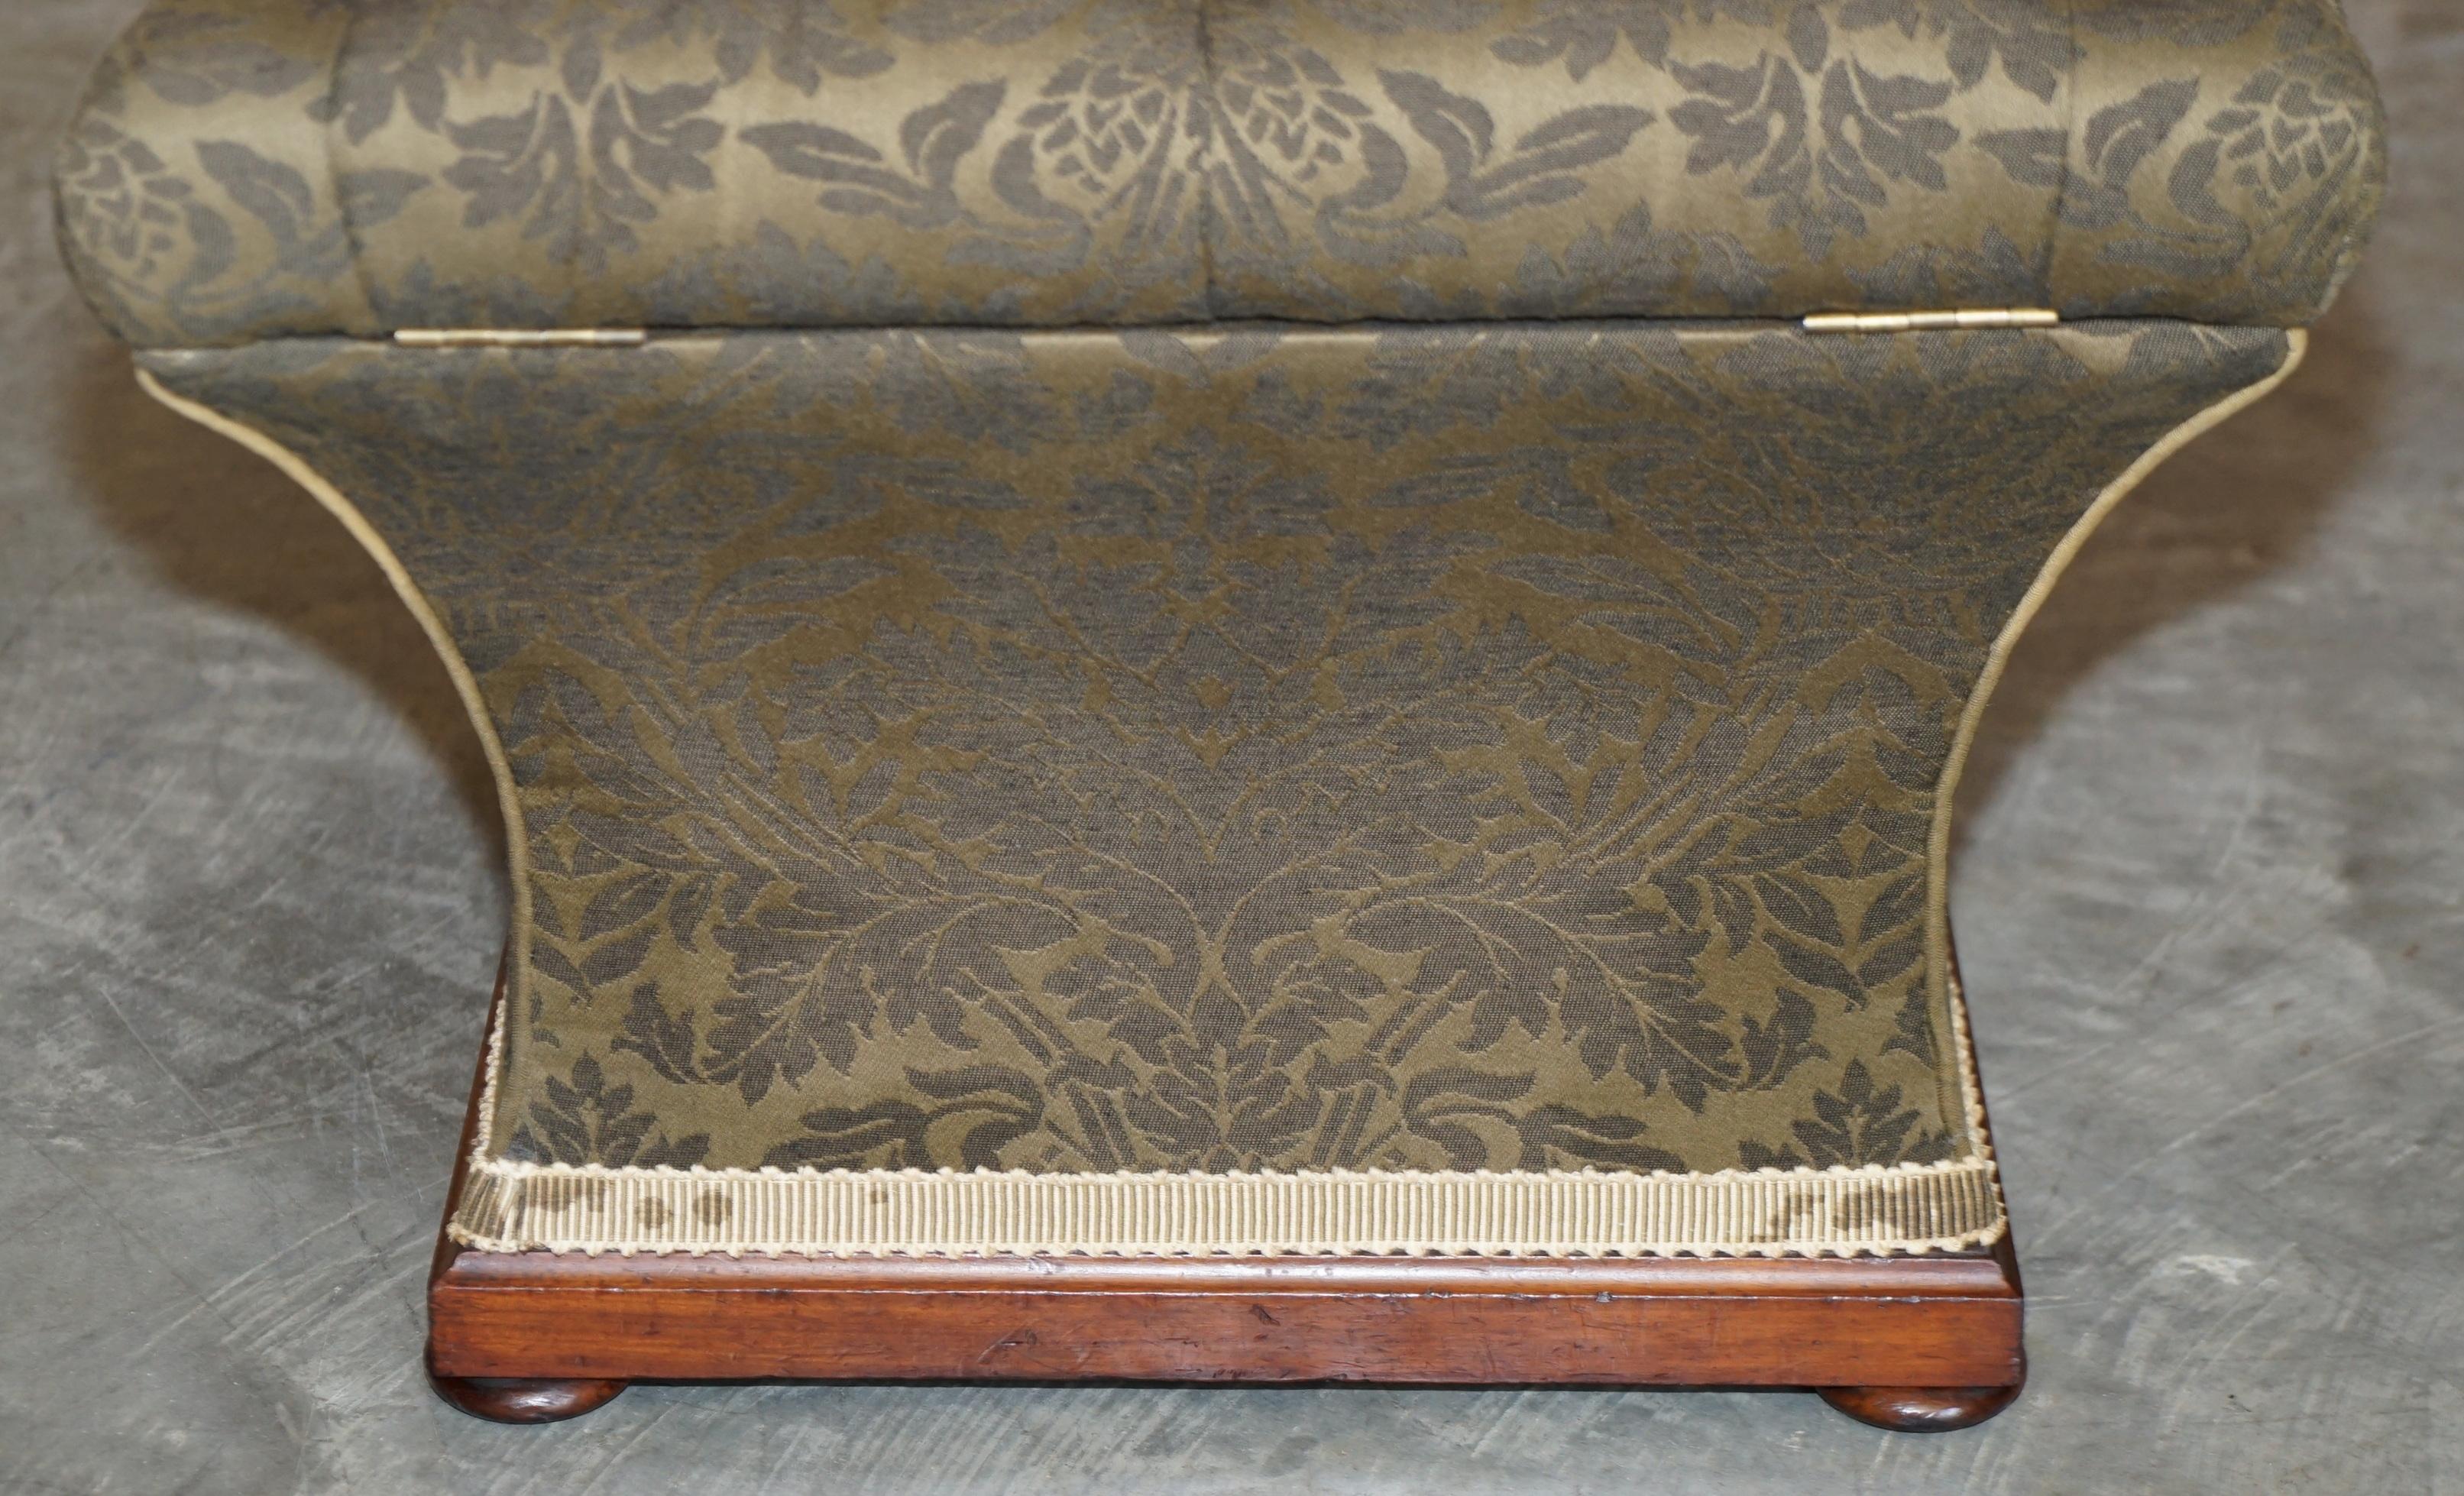 Exquisite Upholstered Victorian circa 1860 Ottoman Stool Footstool with Storage For Sale 1